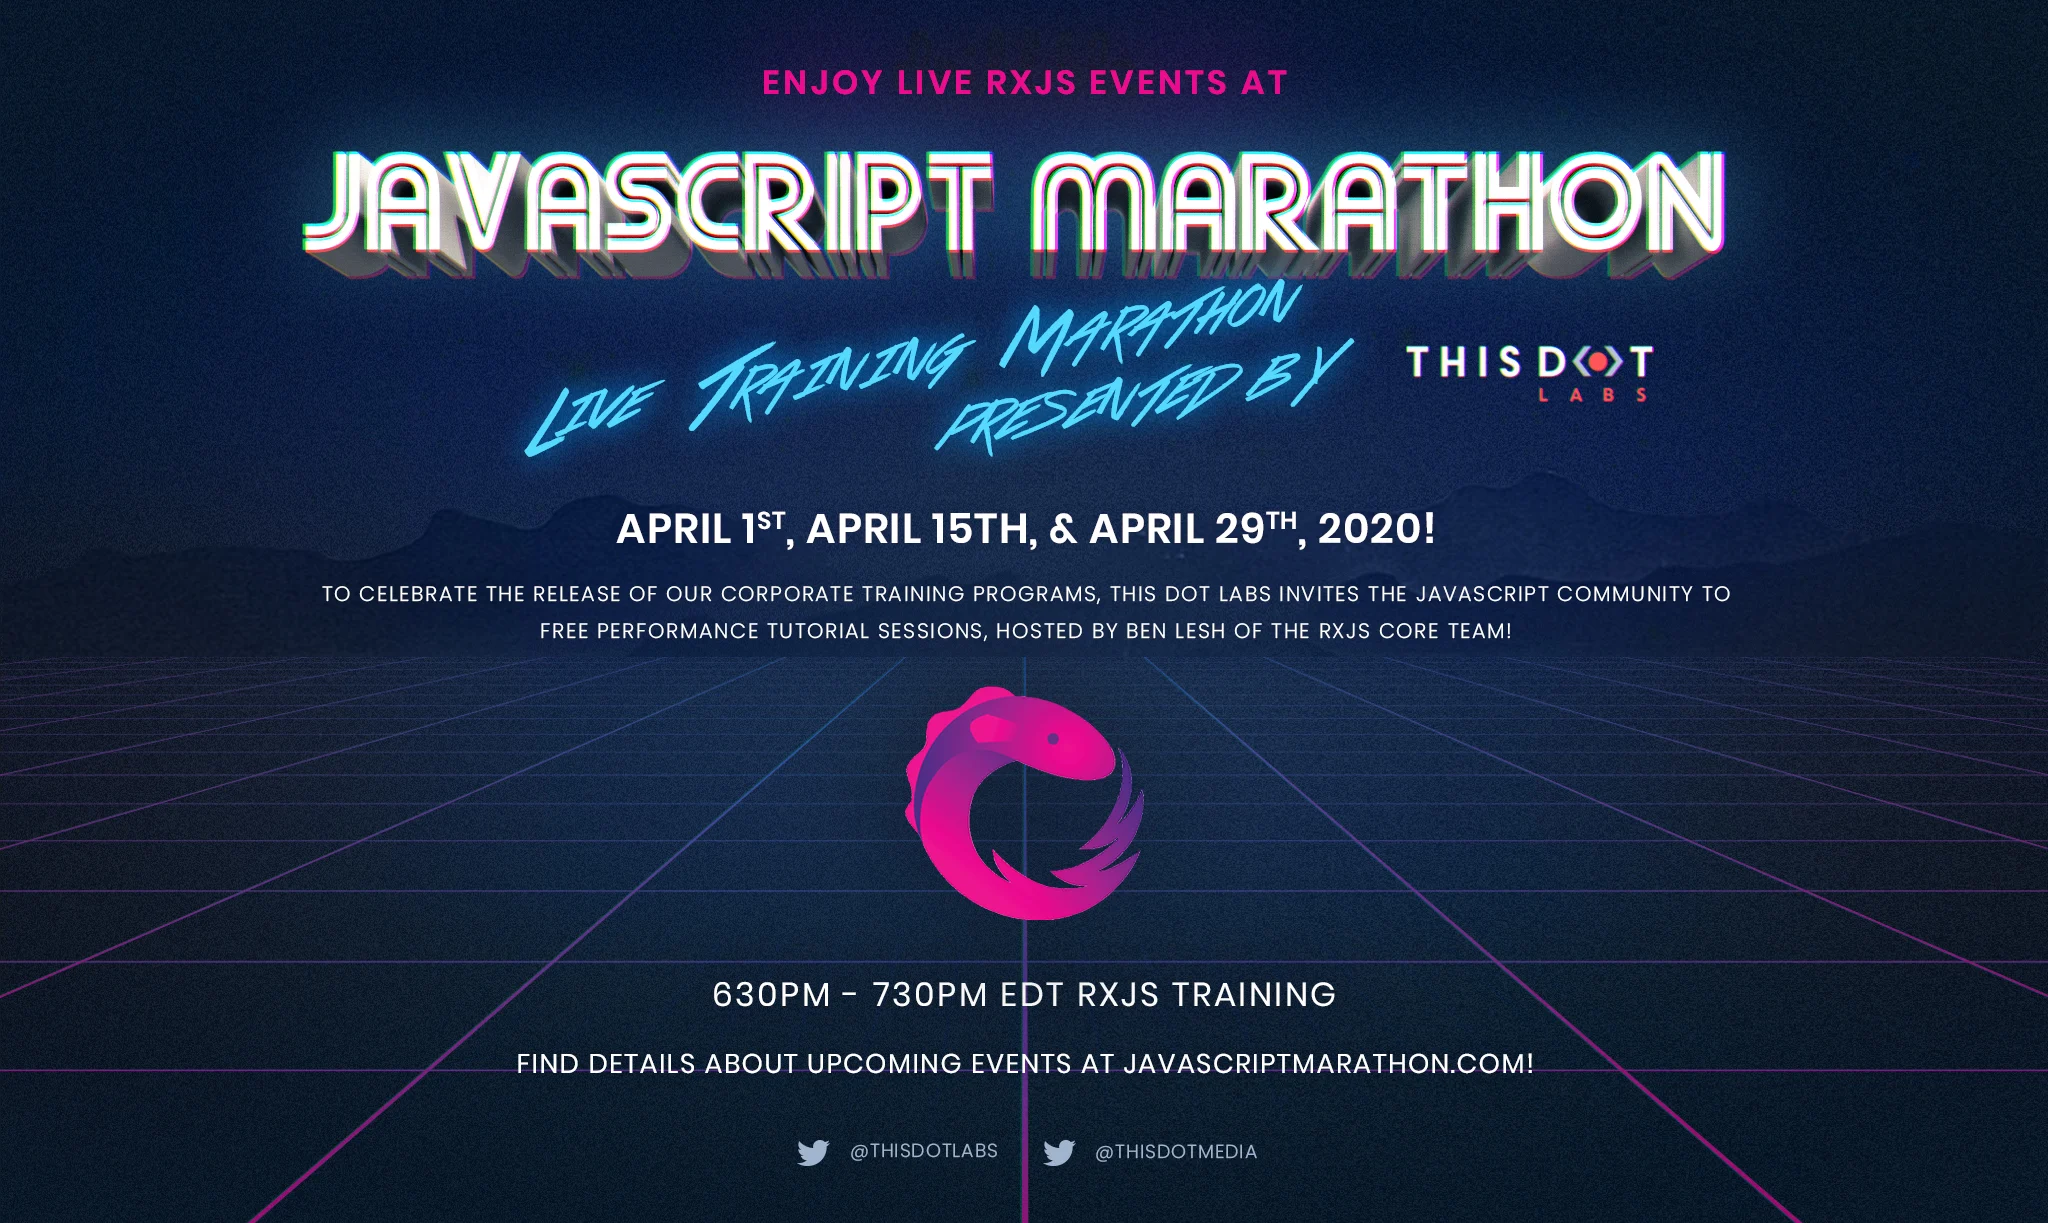 Learn RxJS from Ben Lesh! Free RxJS Training during the JavaScript Marathon by This Dot Labs